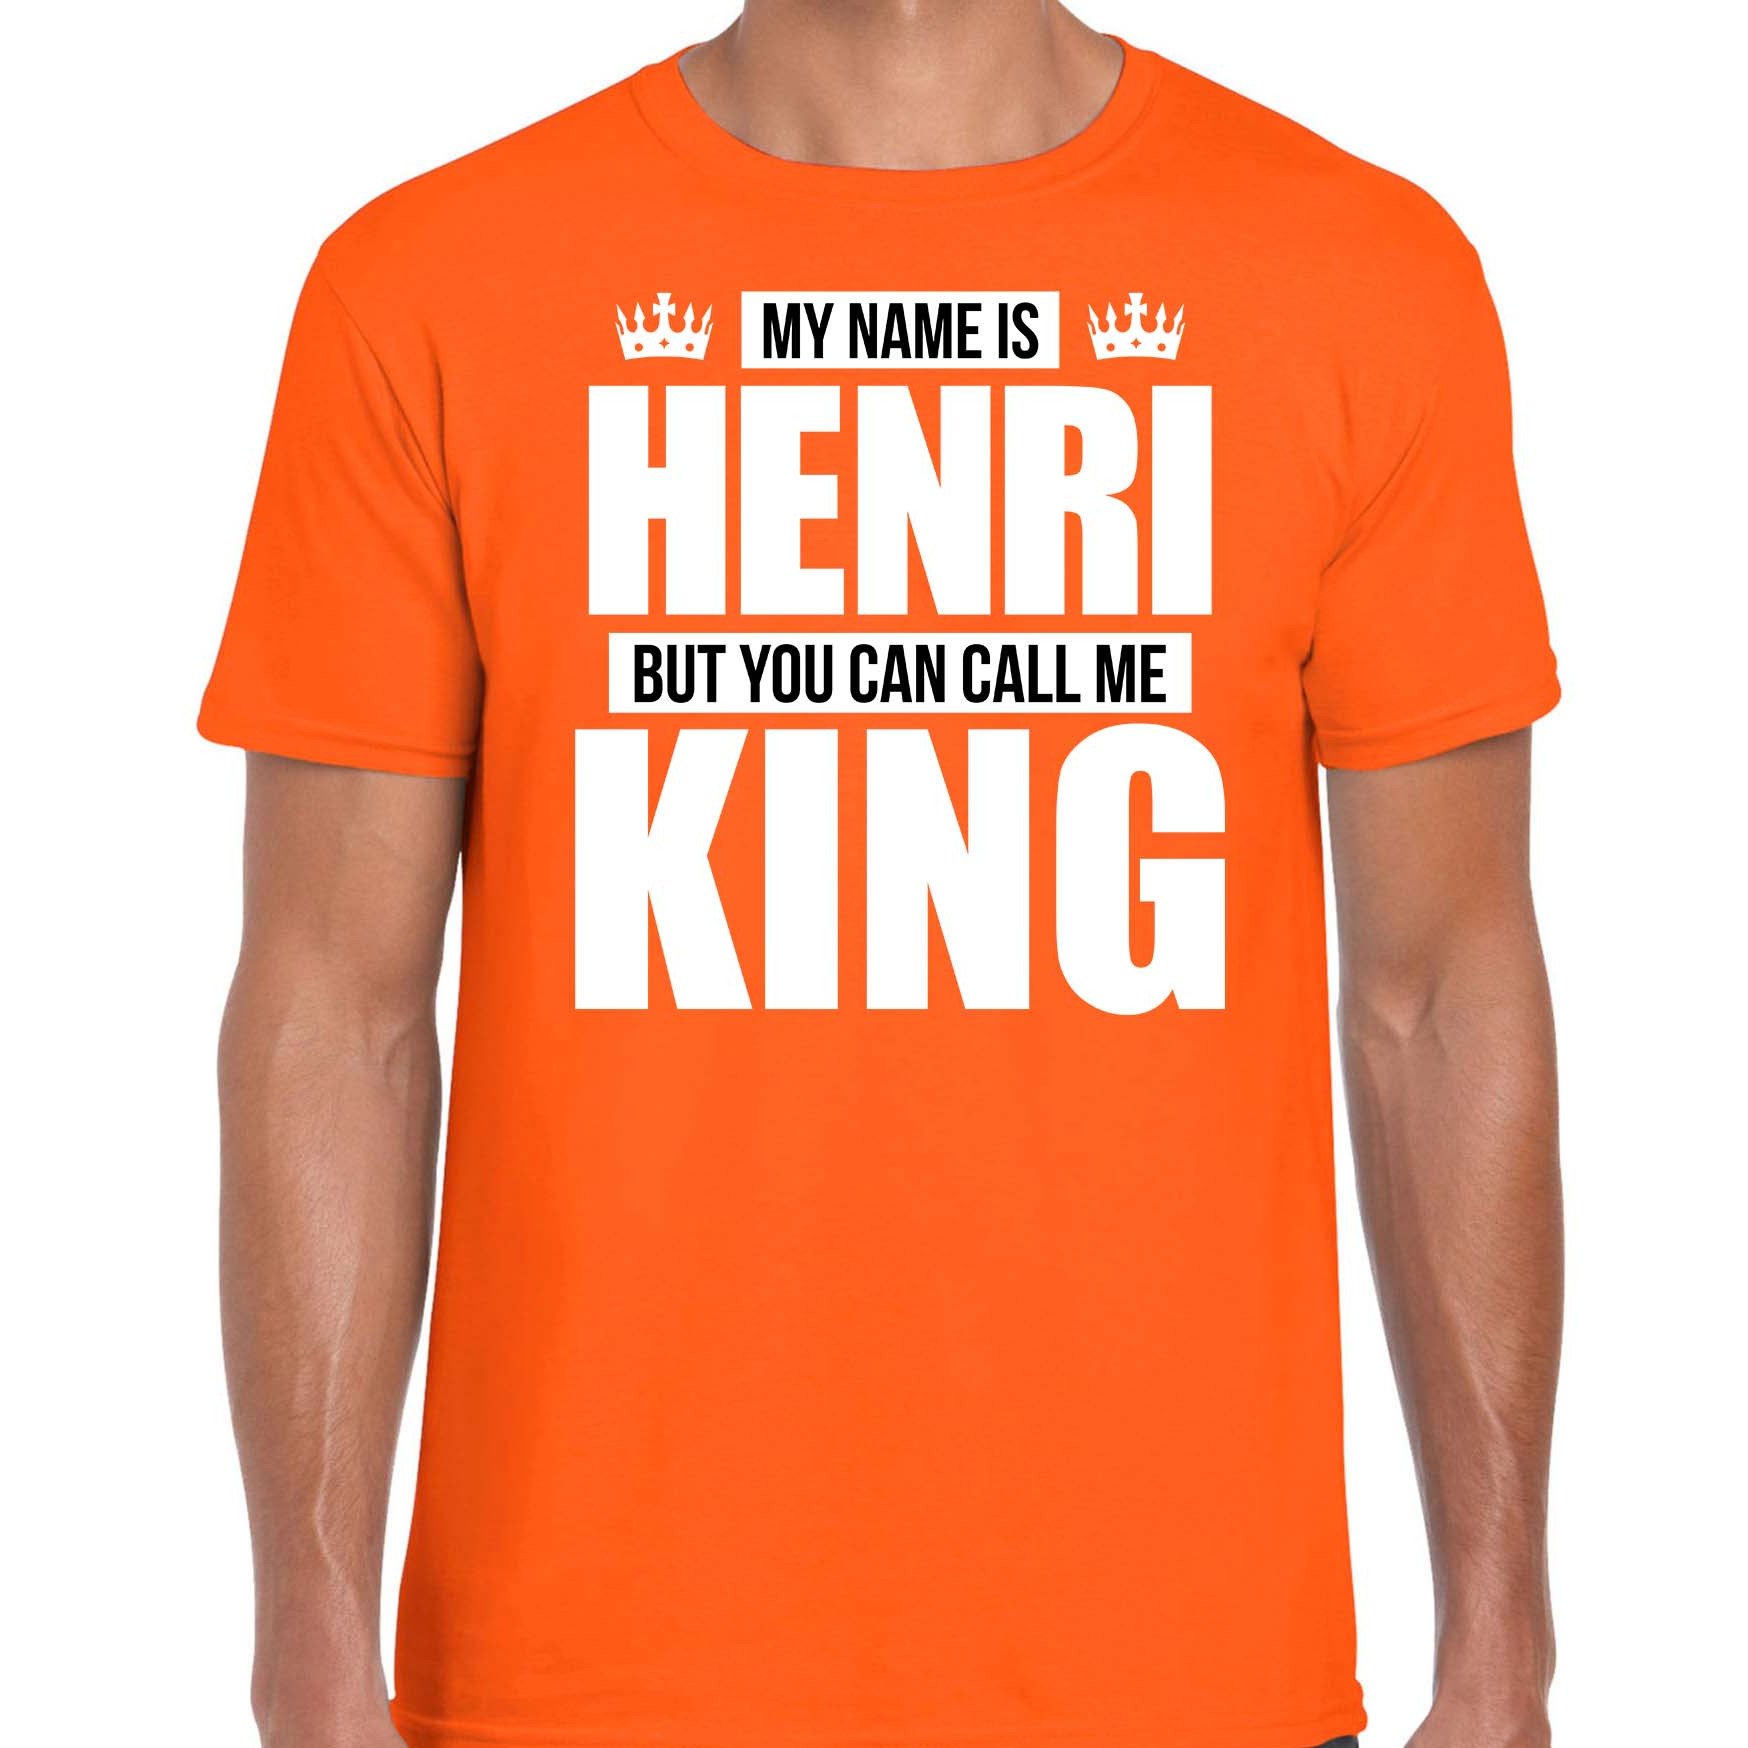 Naam cadeau t-shirt my name is Henri but you can call me King oranje voor heren